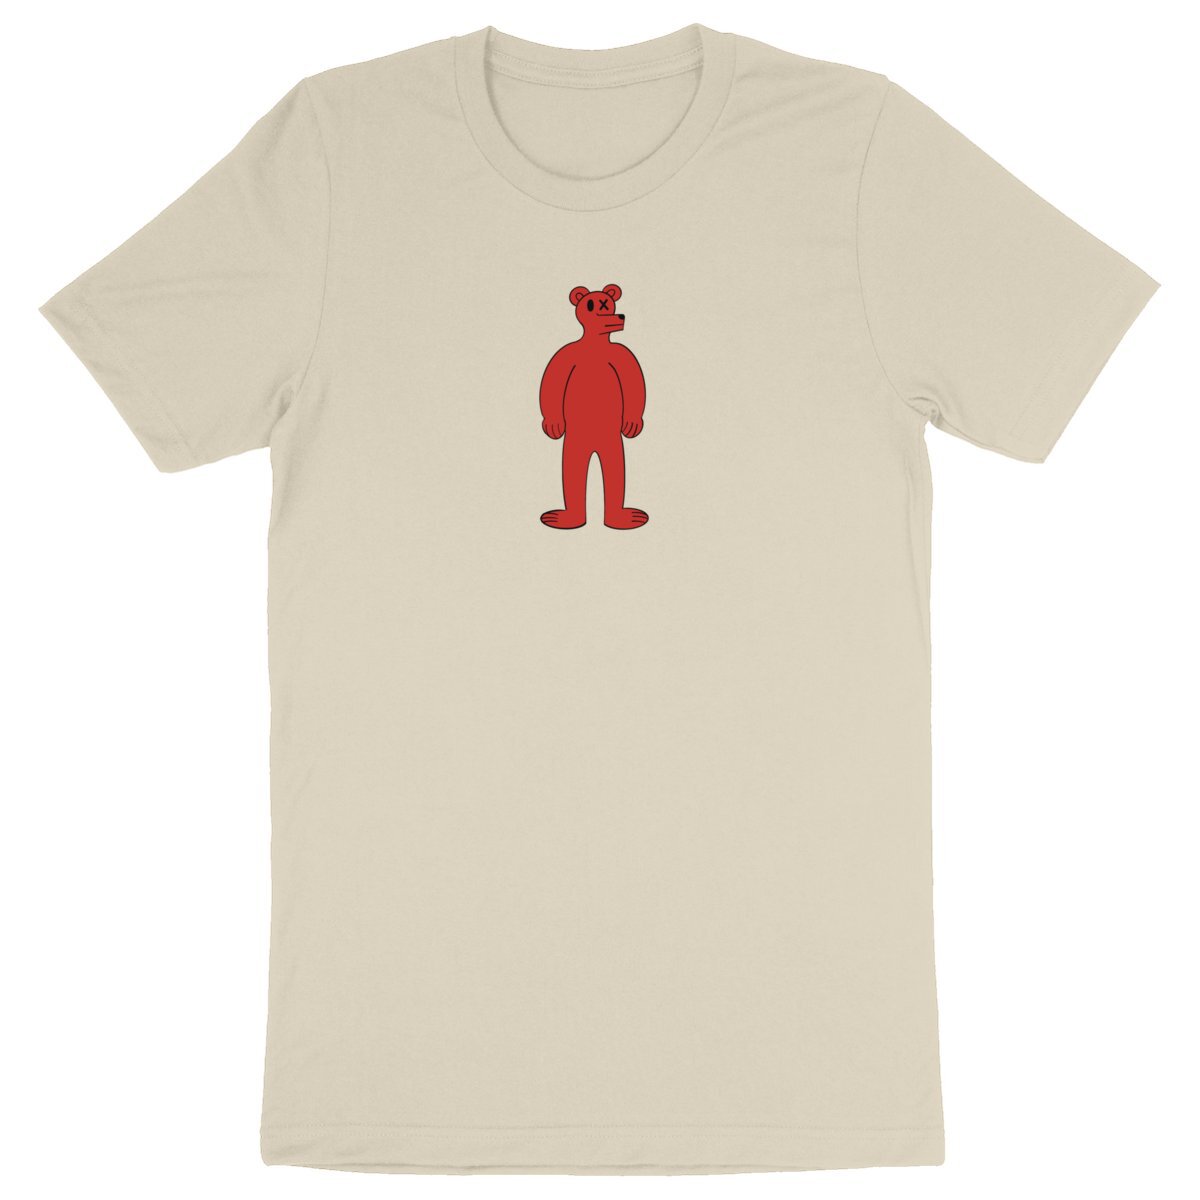 Red Bear Graphic Tee